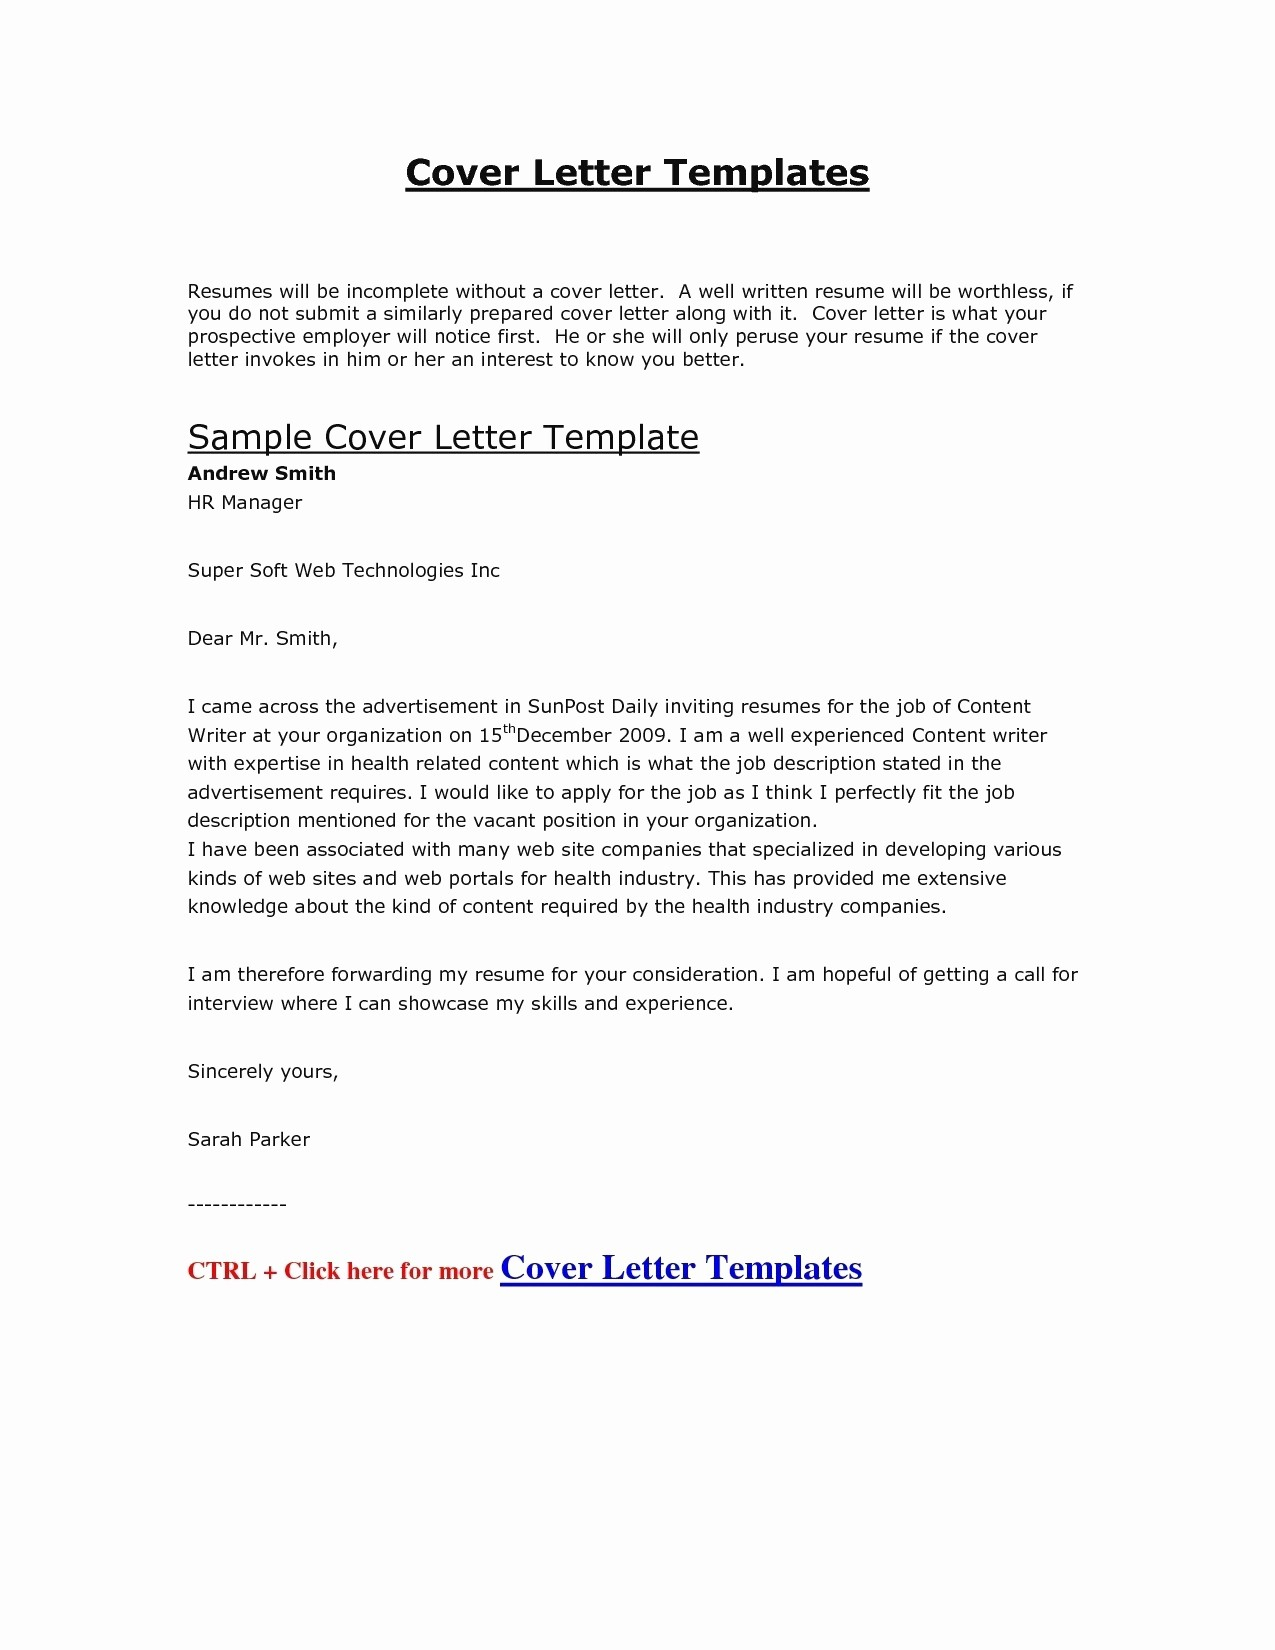 Cover Letter format Template - Job Application Letter format Template Copy Cover Letter Template Hr